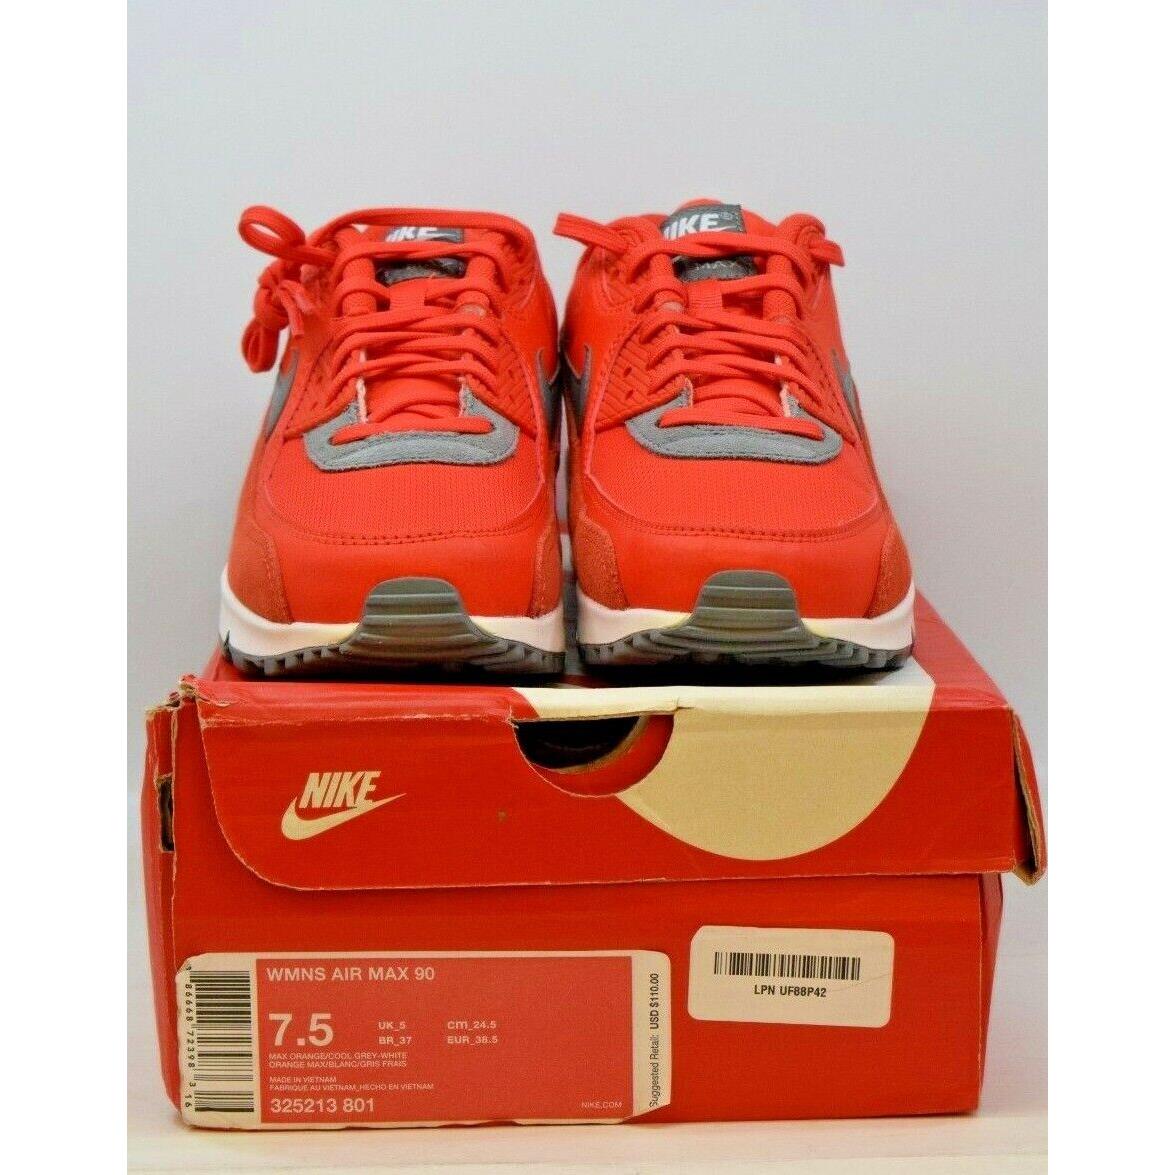 Loneliness Expect Huh Nike Air Max 90 Sneaker Running Shoes Red/white 325213 801 Womens Size 7.5  | 886668723983 - Nike shoes Air Max - White | SporTipTop